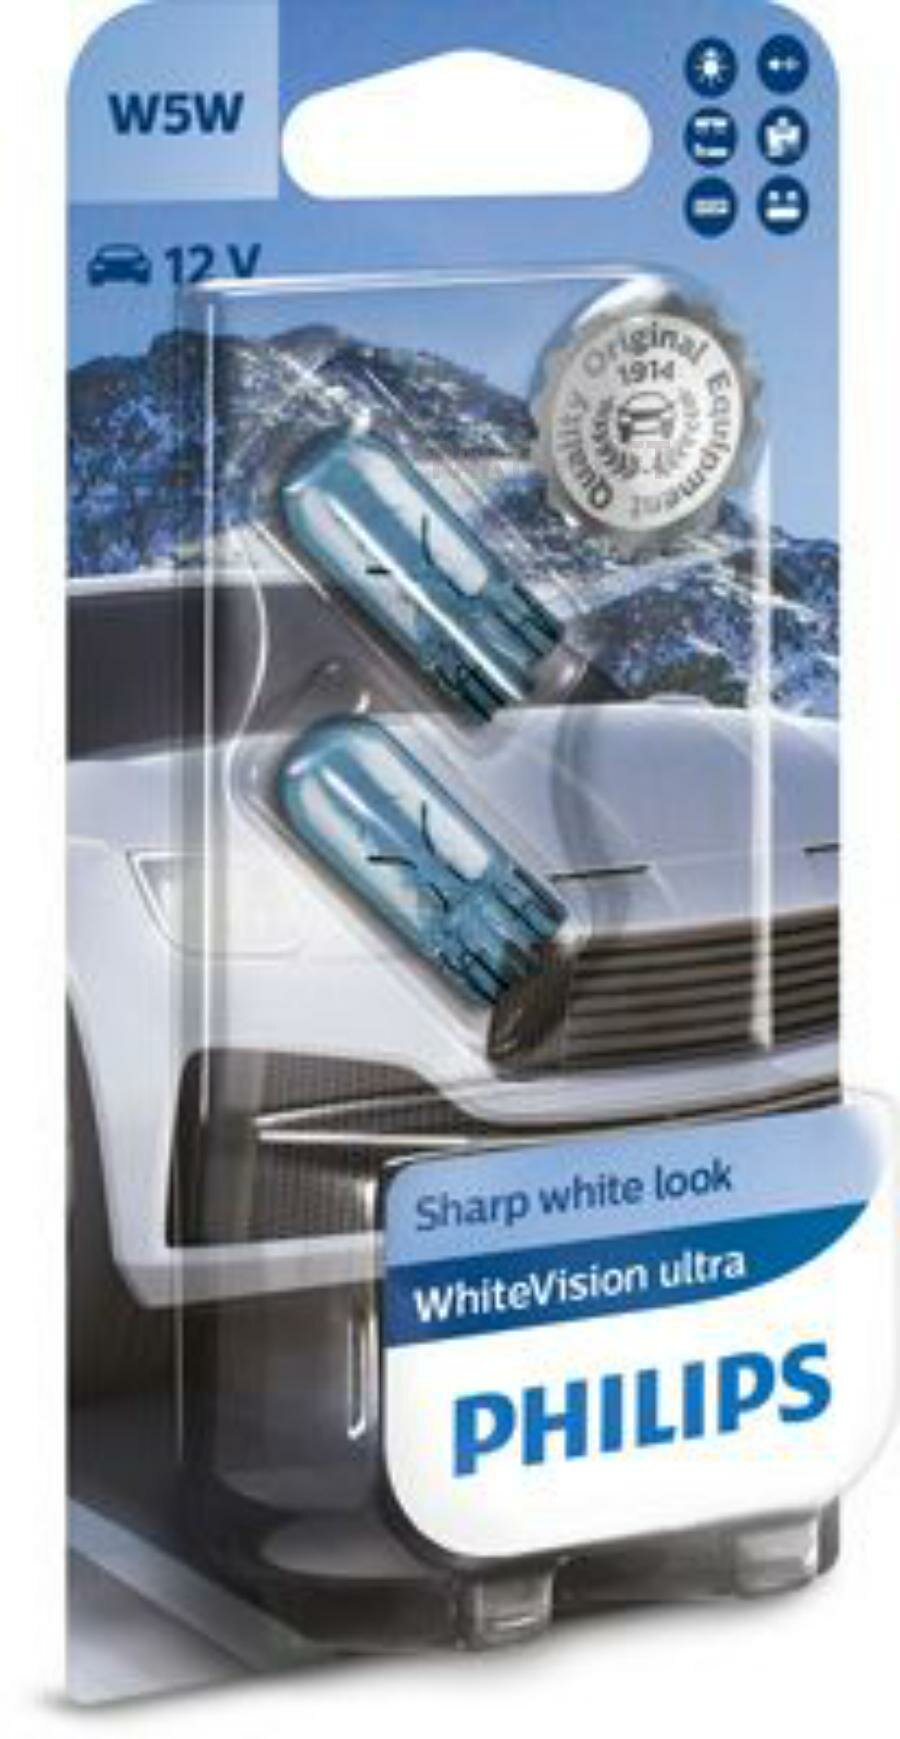 PHILIPS 12961WVUB2 Лампа 12V5W W2.1x9.5d Philips WhiteVision ultra 4200K 12961WVUB2 2шт